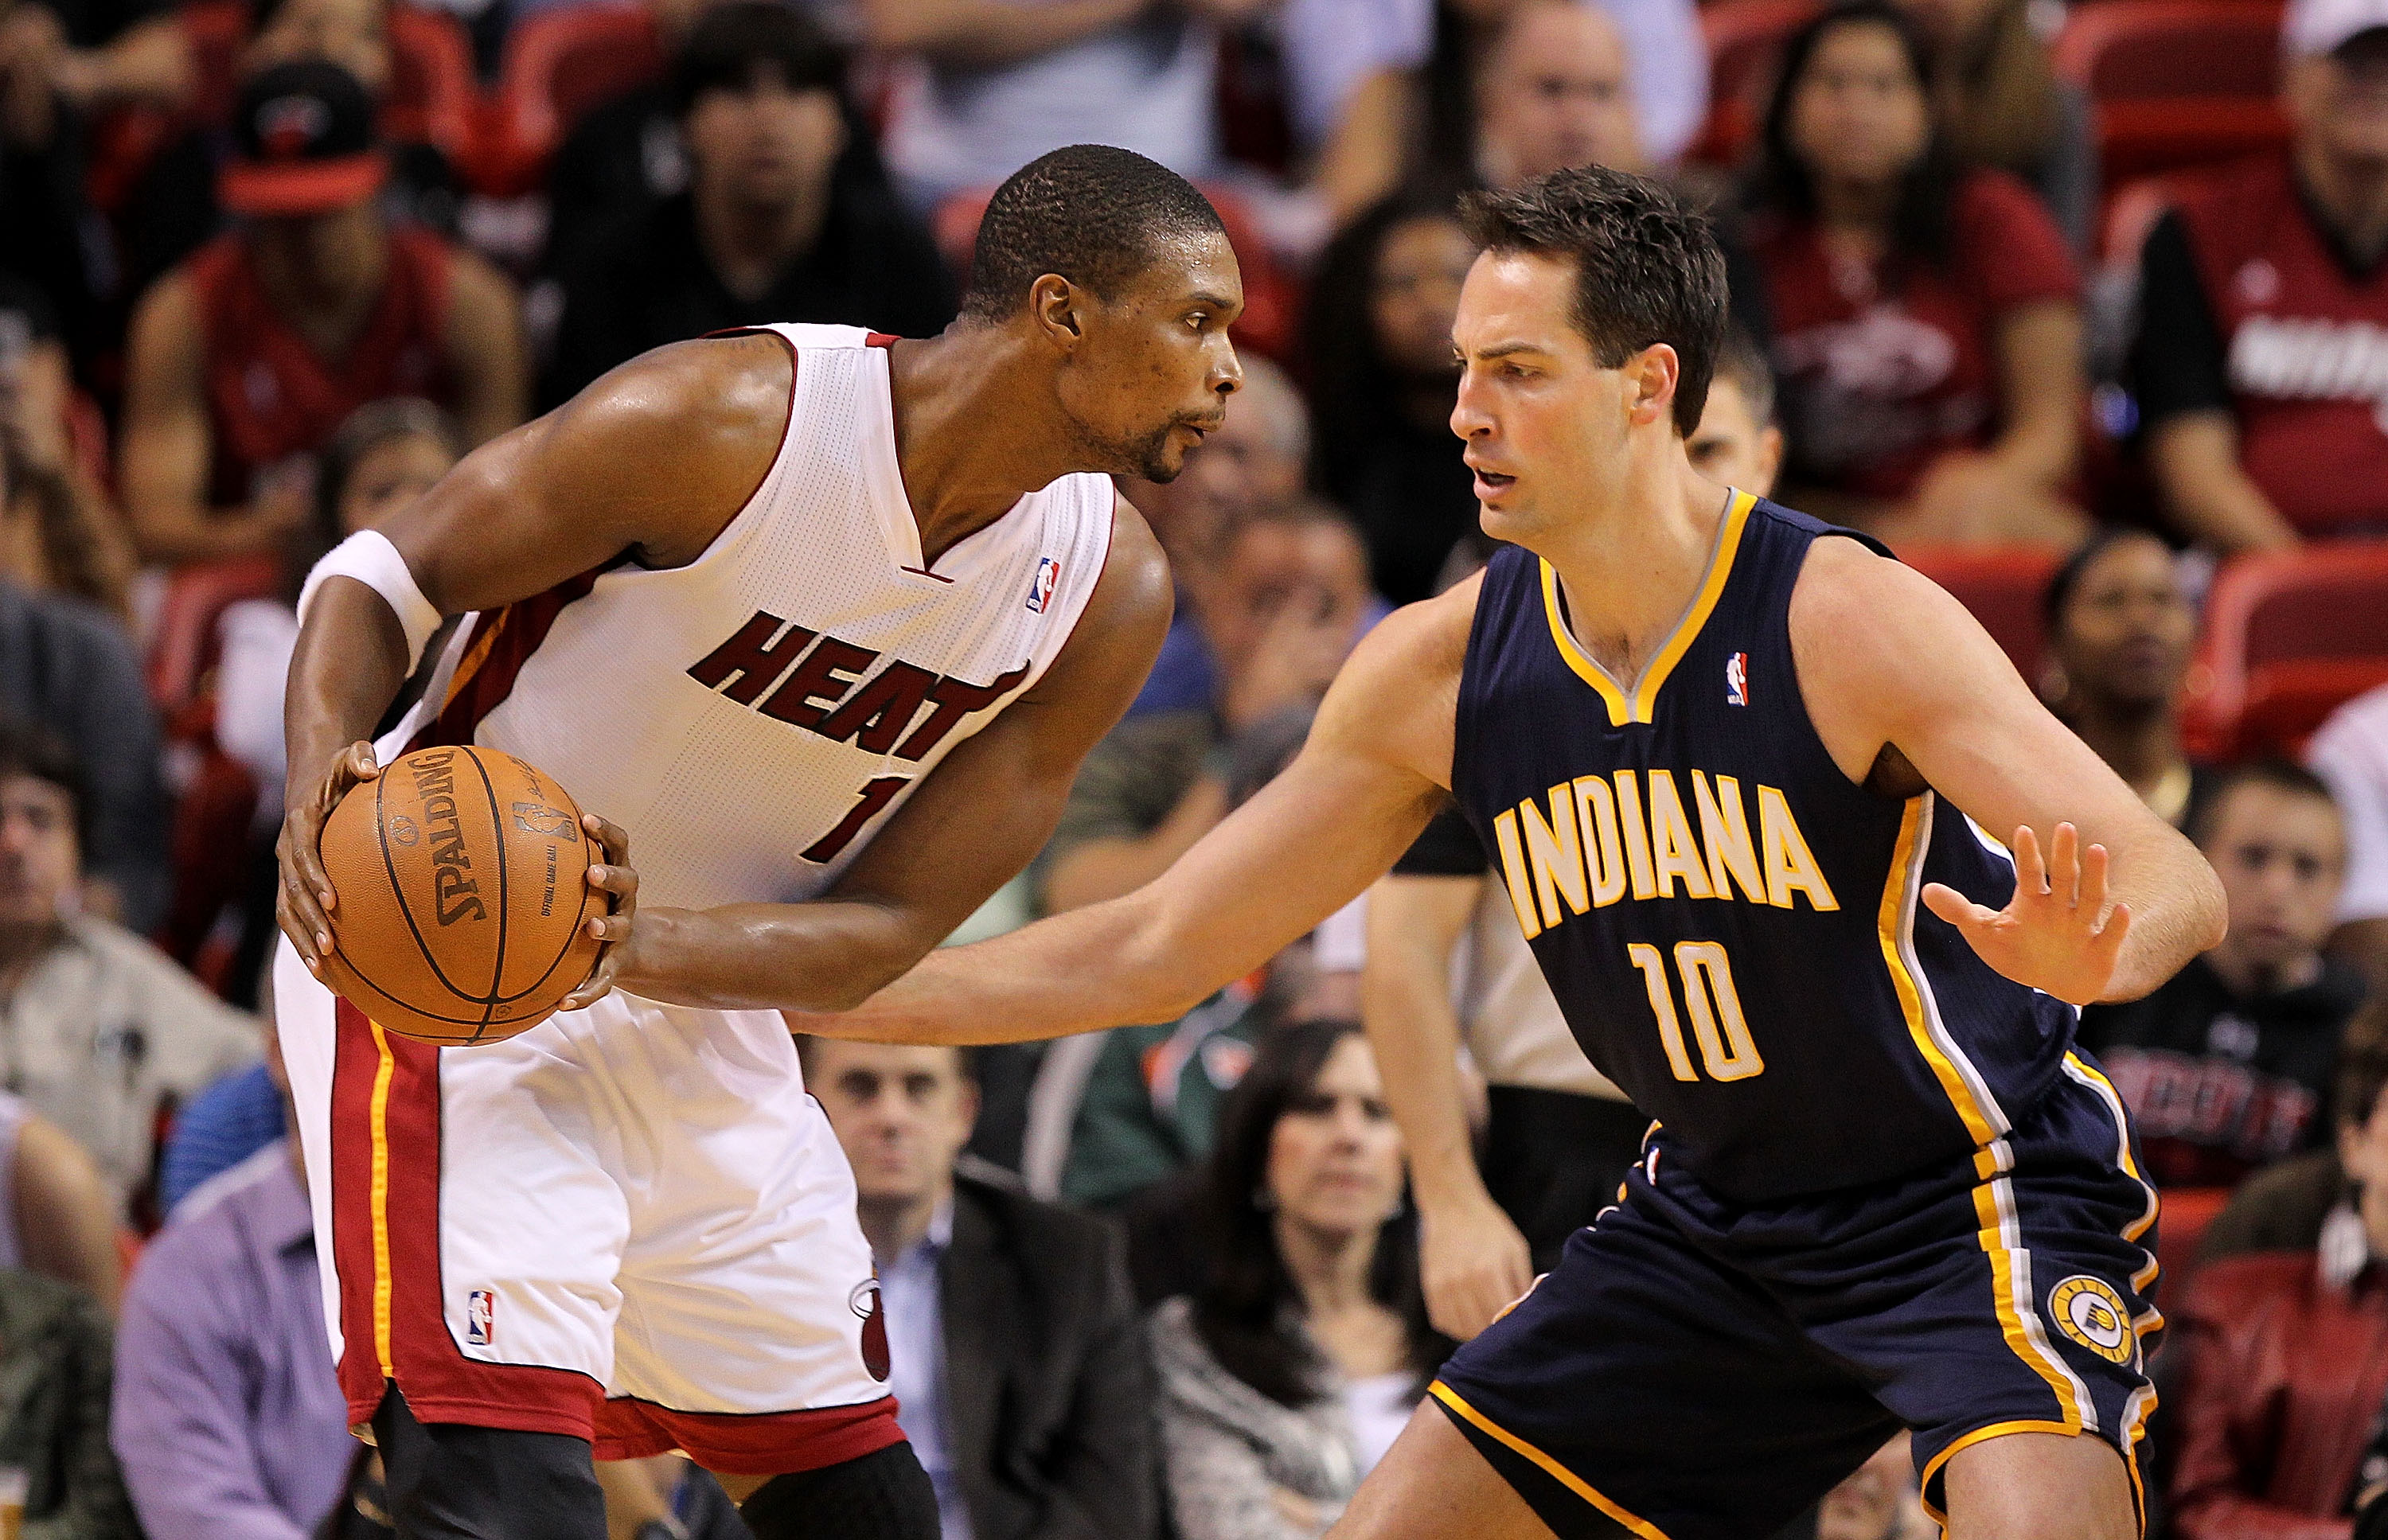 MIAMI, FL - FEBRUARY 08:  Chris Bosh #1 of the Miami Heat is guarded by Jeff Foster #10 of the Indiana Pacers during a game at American Airlines Arena on February 8, 2011 in Miami, Florida. NOTE TO USER: User expressly acknowledges and agrees that, by dow